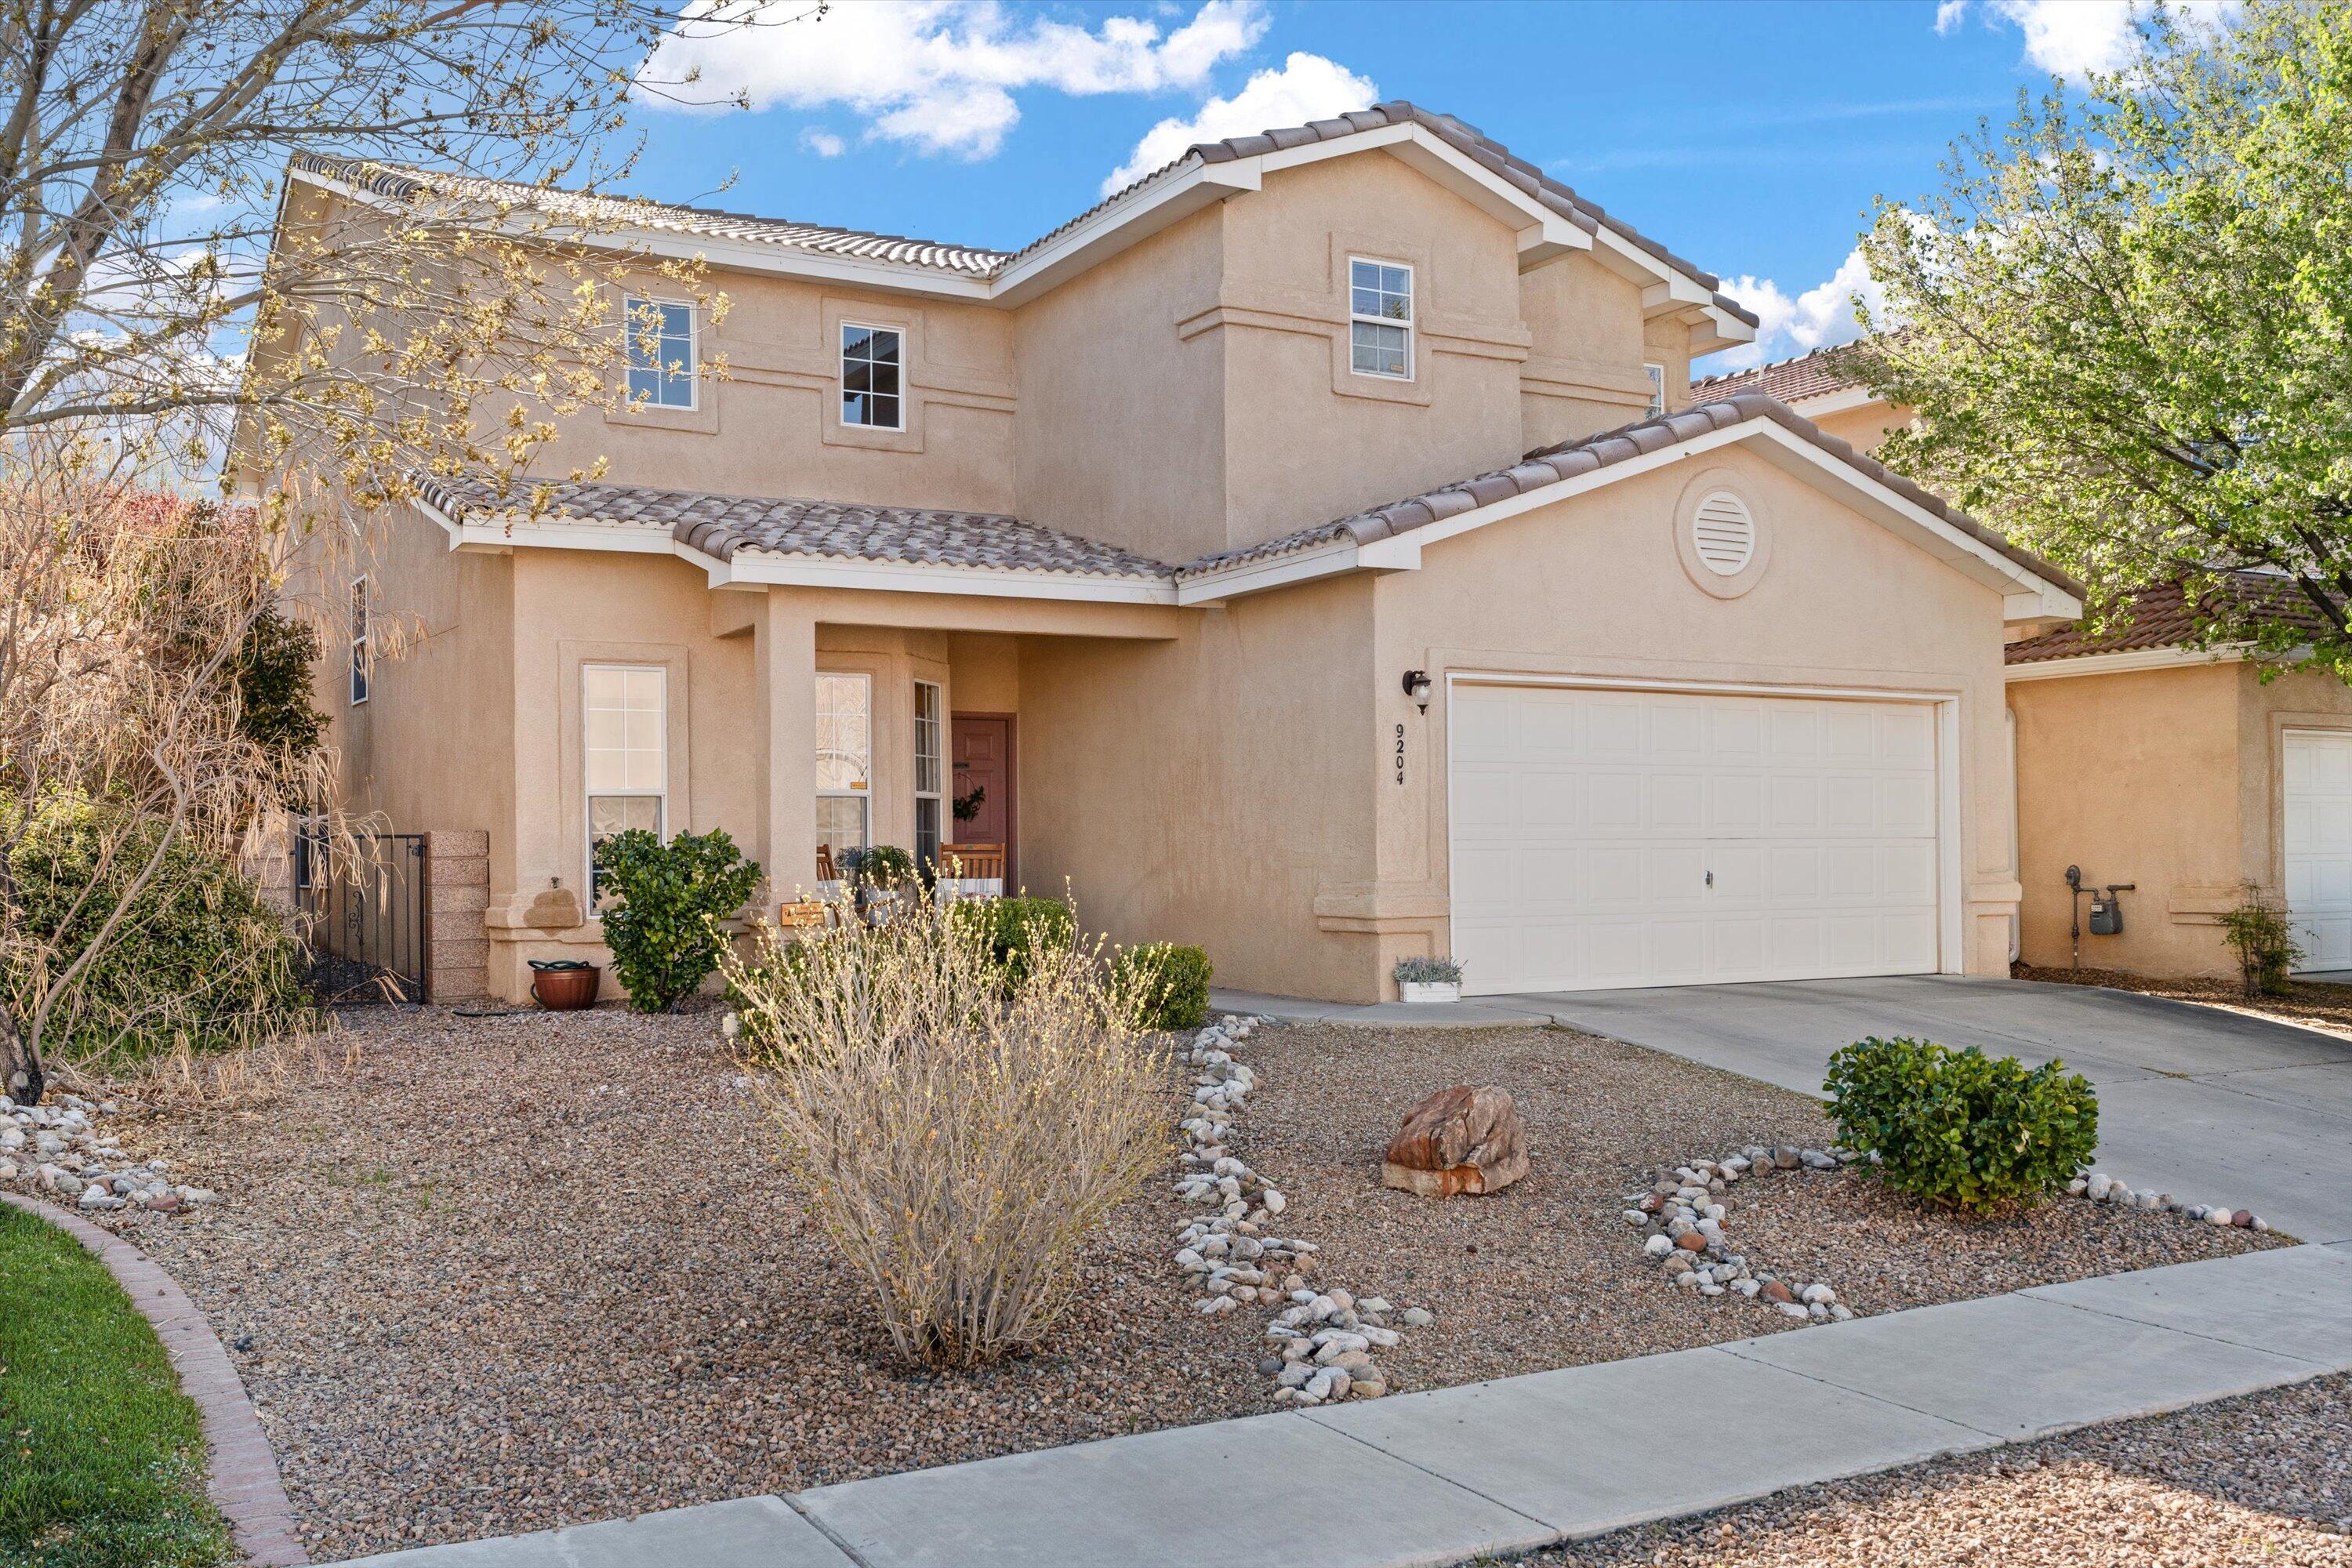 This fabulous home located in the highly sought-after Desert Ridge Trails subdivision features an open bright floorplan with 2 living areas, loft, granite countertops, pantry, covered patio, balcony, upstairs laundry, Sandia Mountain views and low maintenance landscaping.